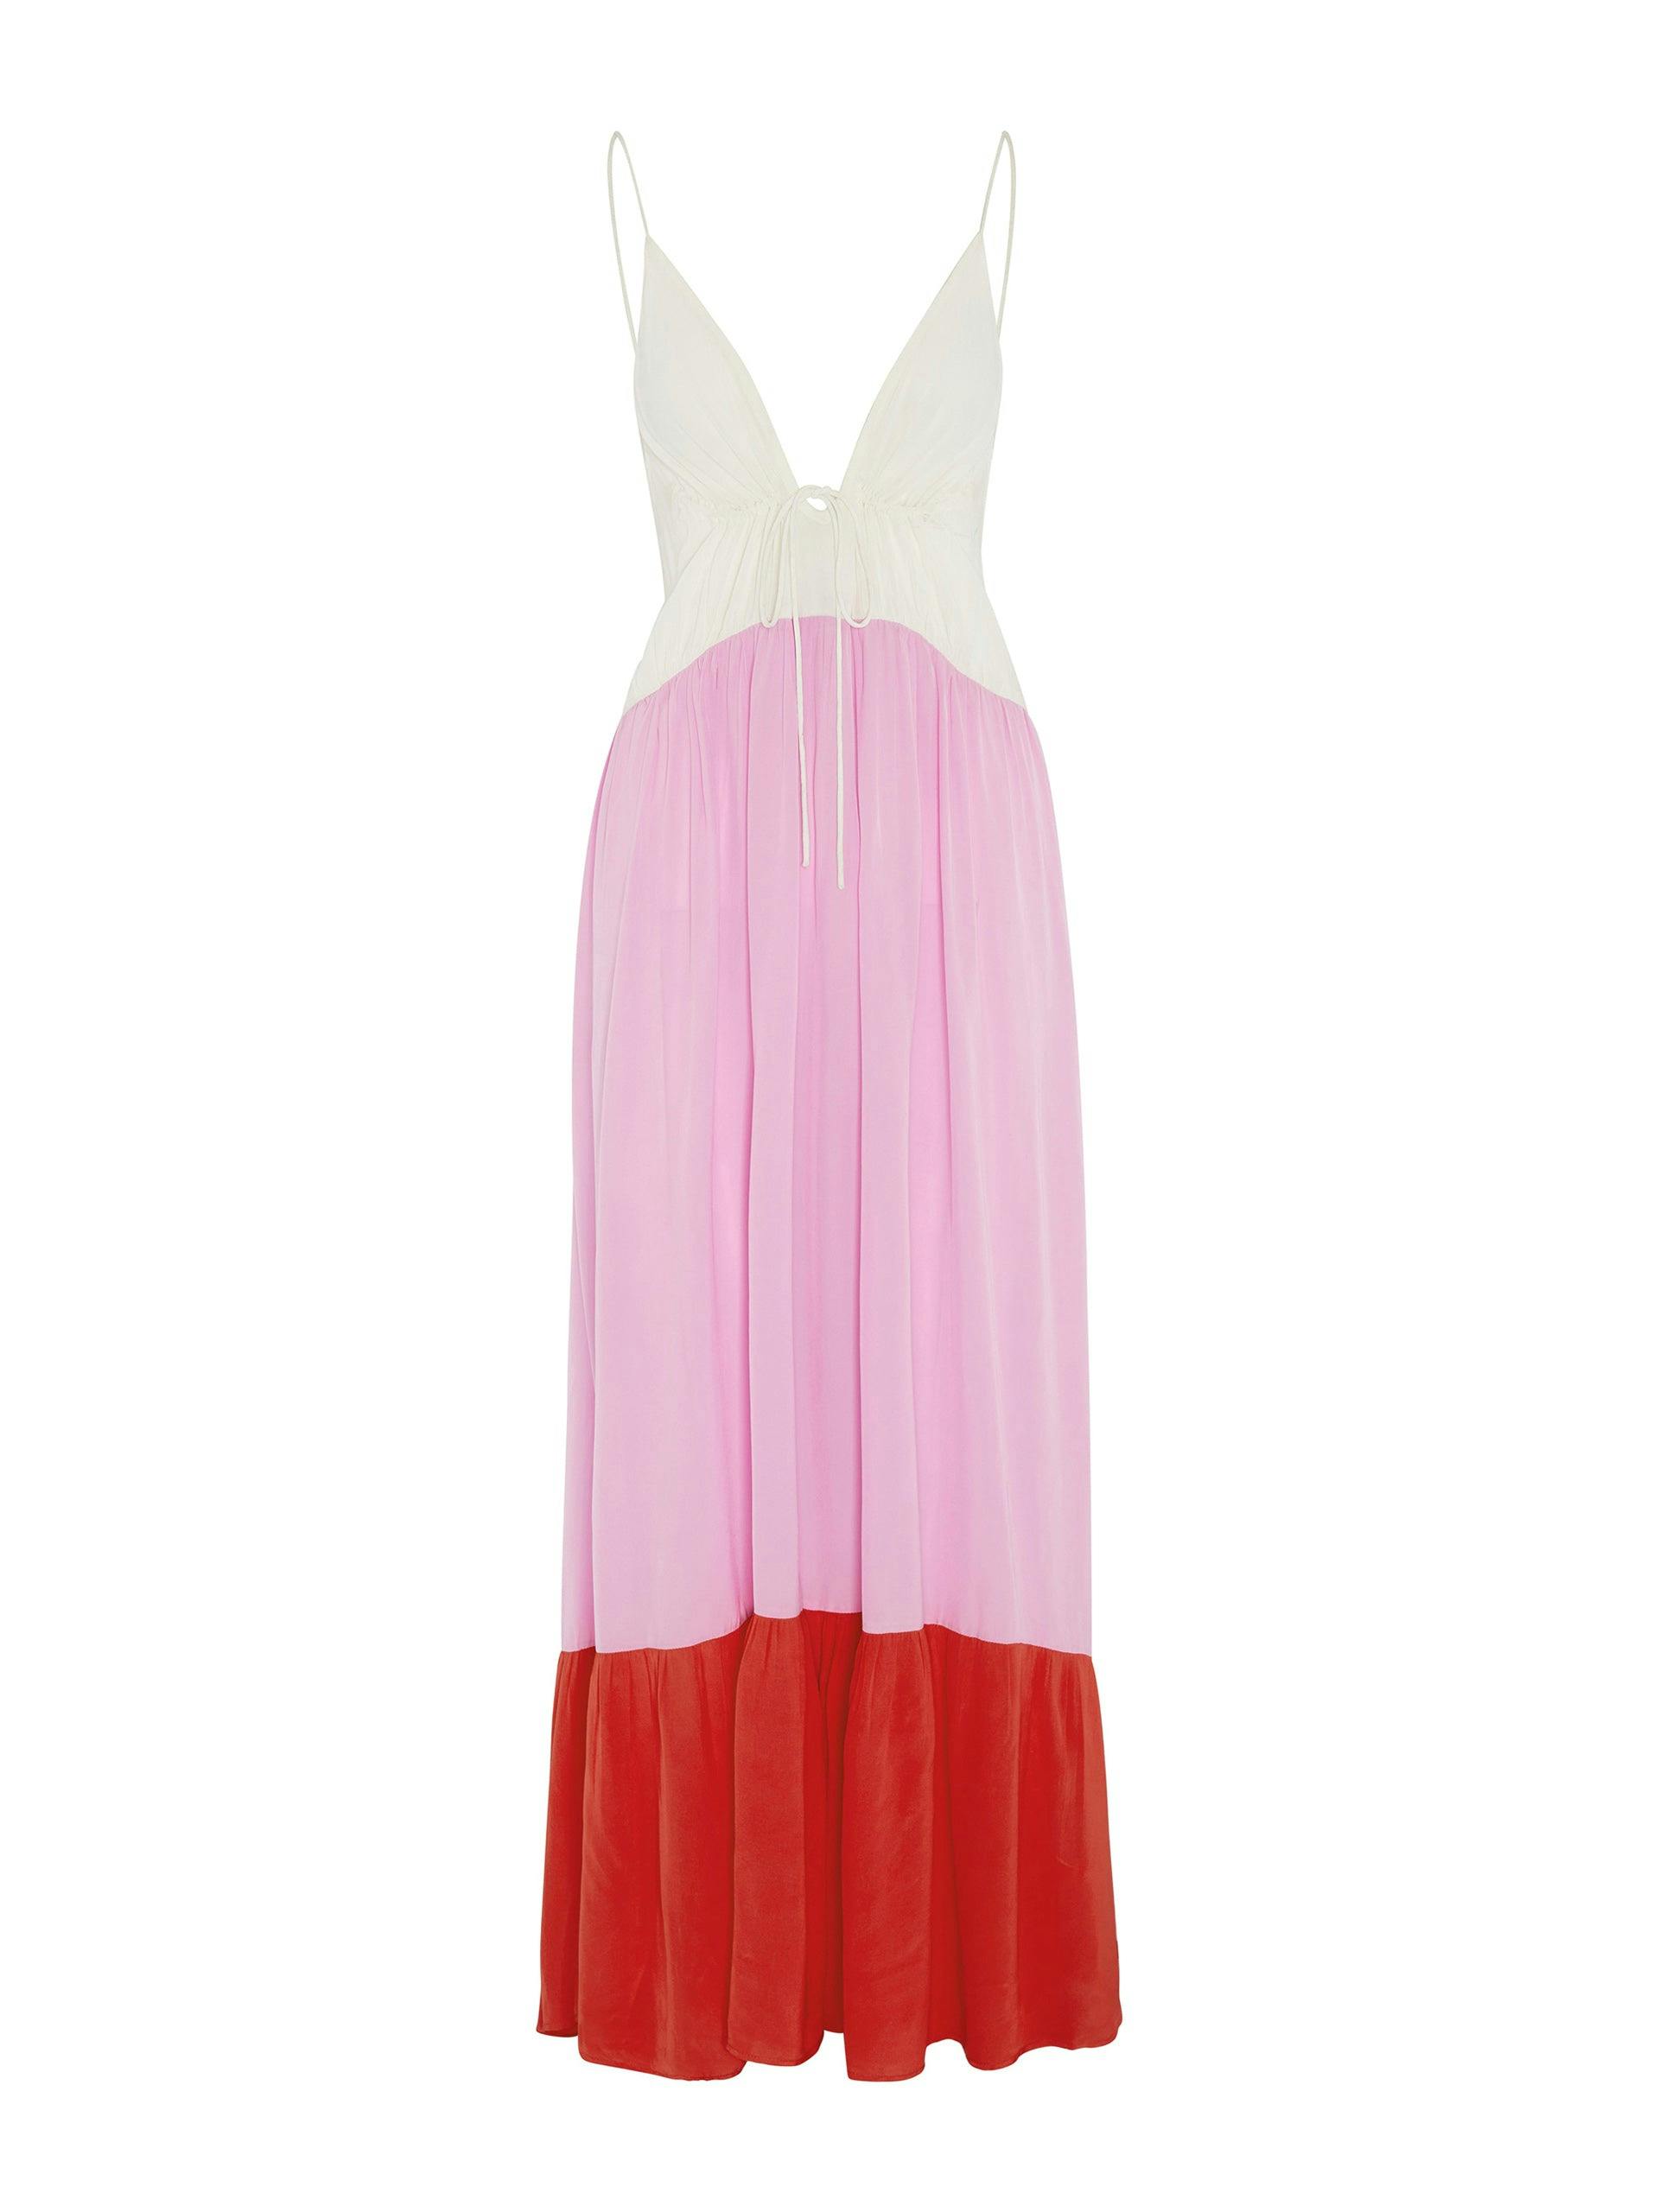 Soft white, orchid and poppy Love dress in Crepe de Chine